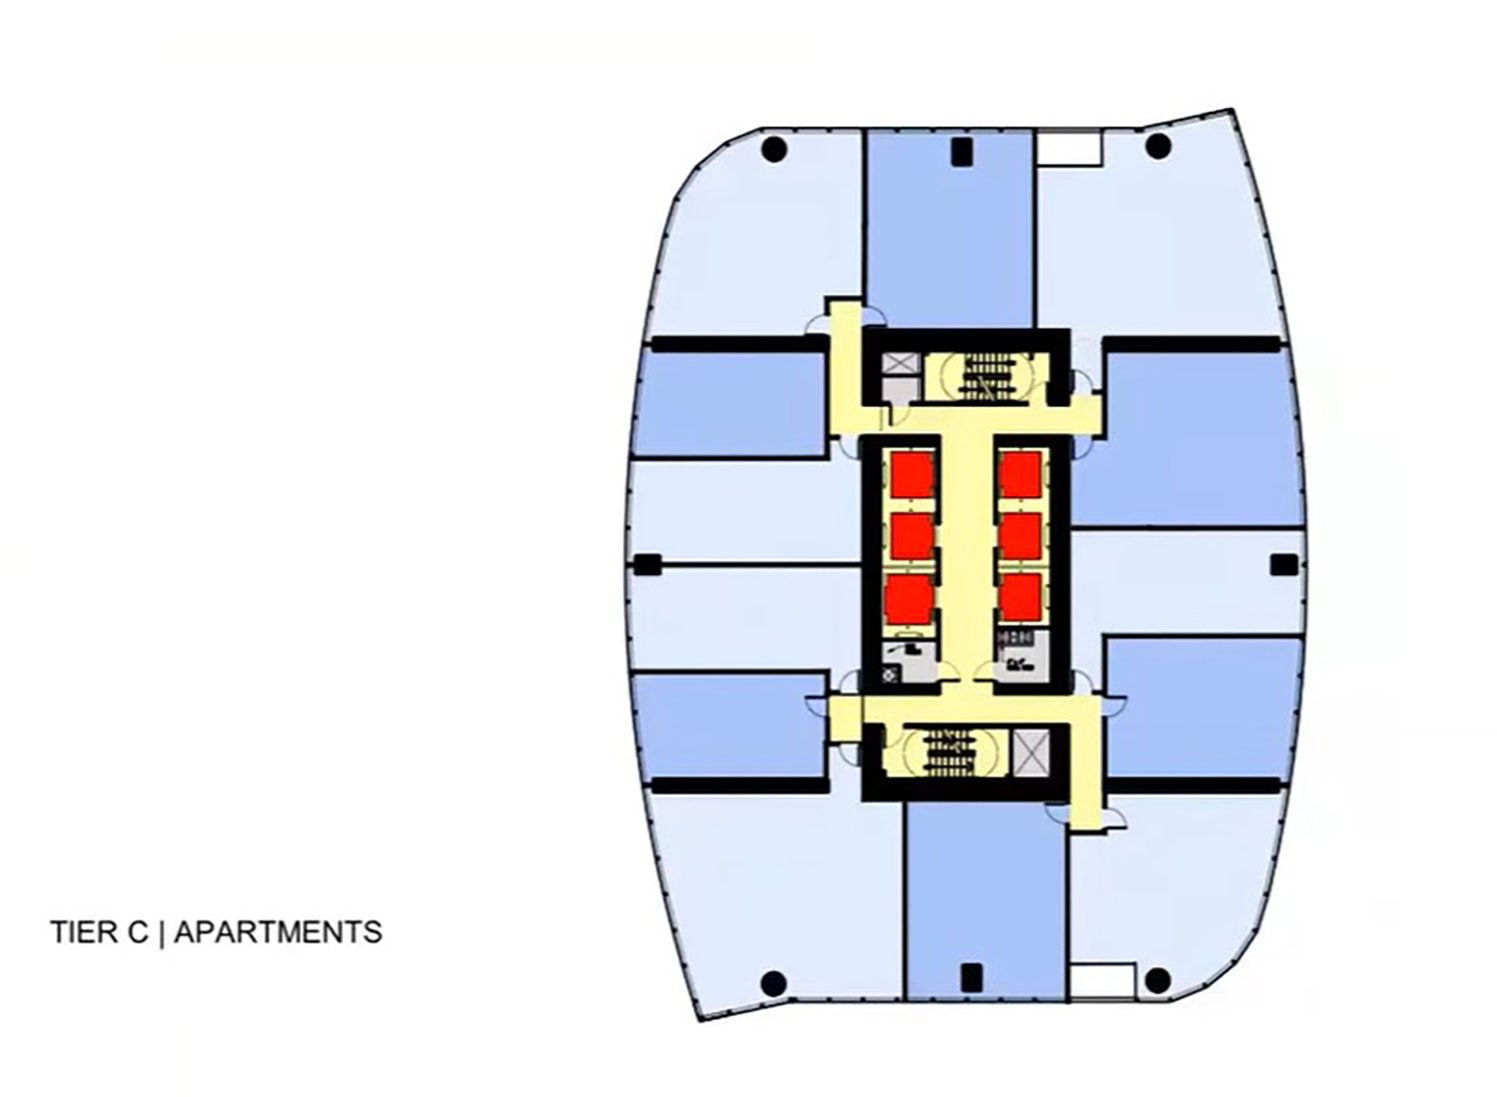 Typical Floor Plan for Tier C and D Apartments at 1000M. Drawing by JAHN